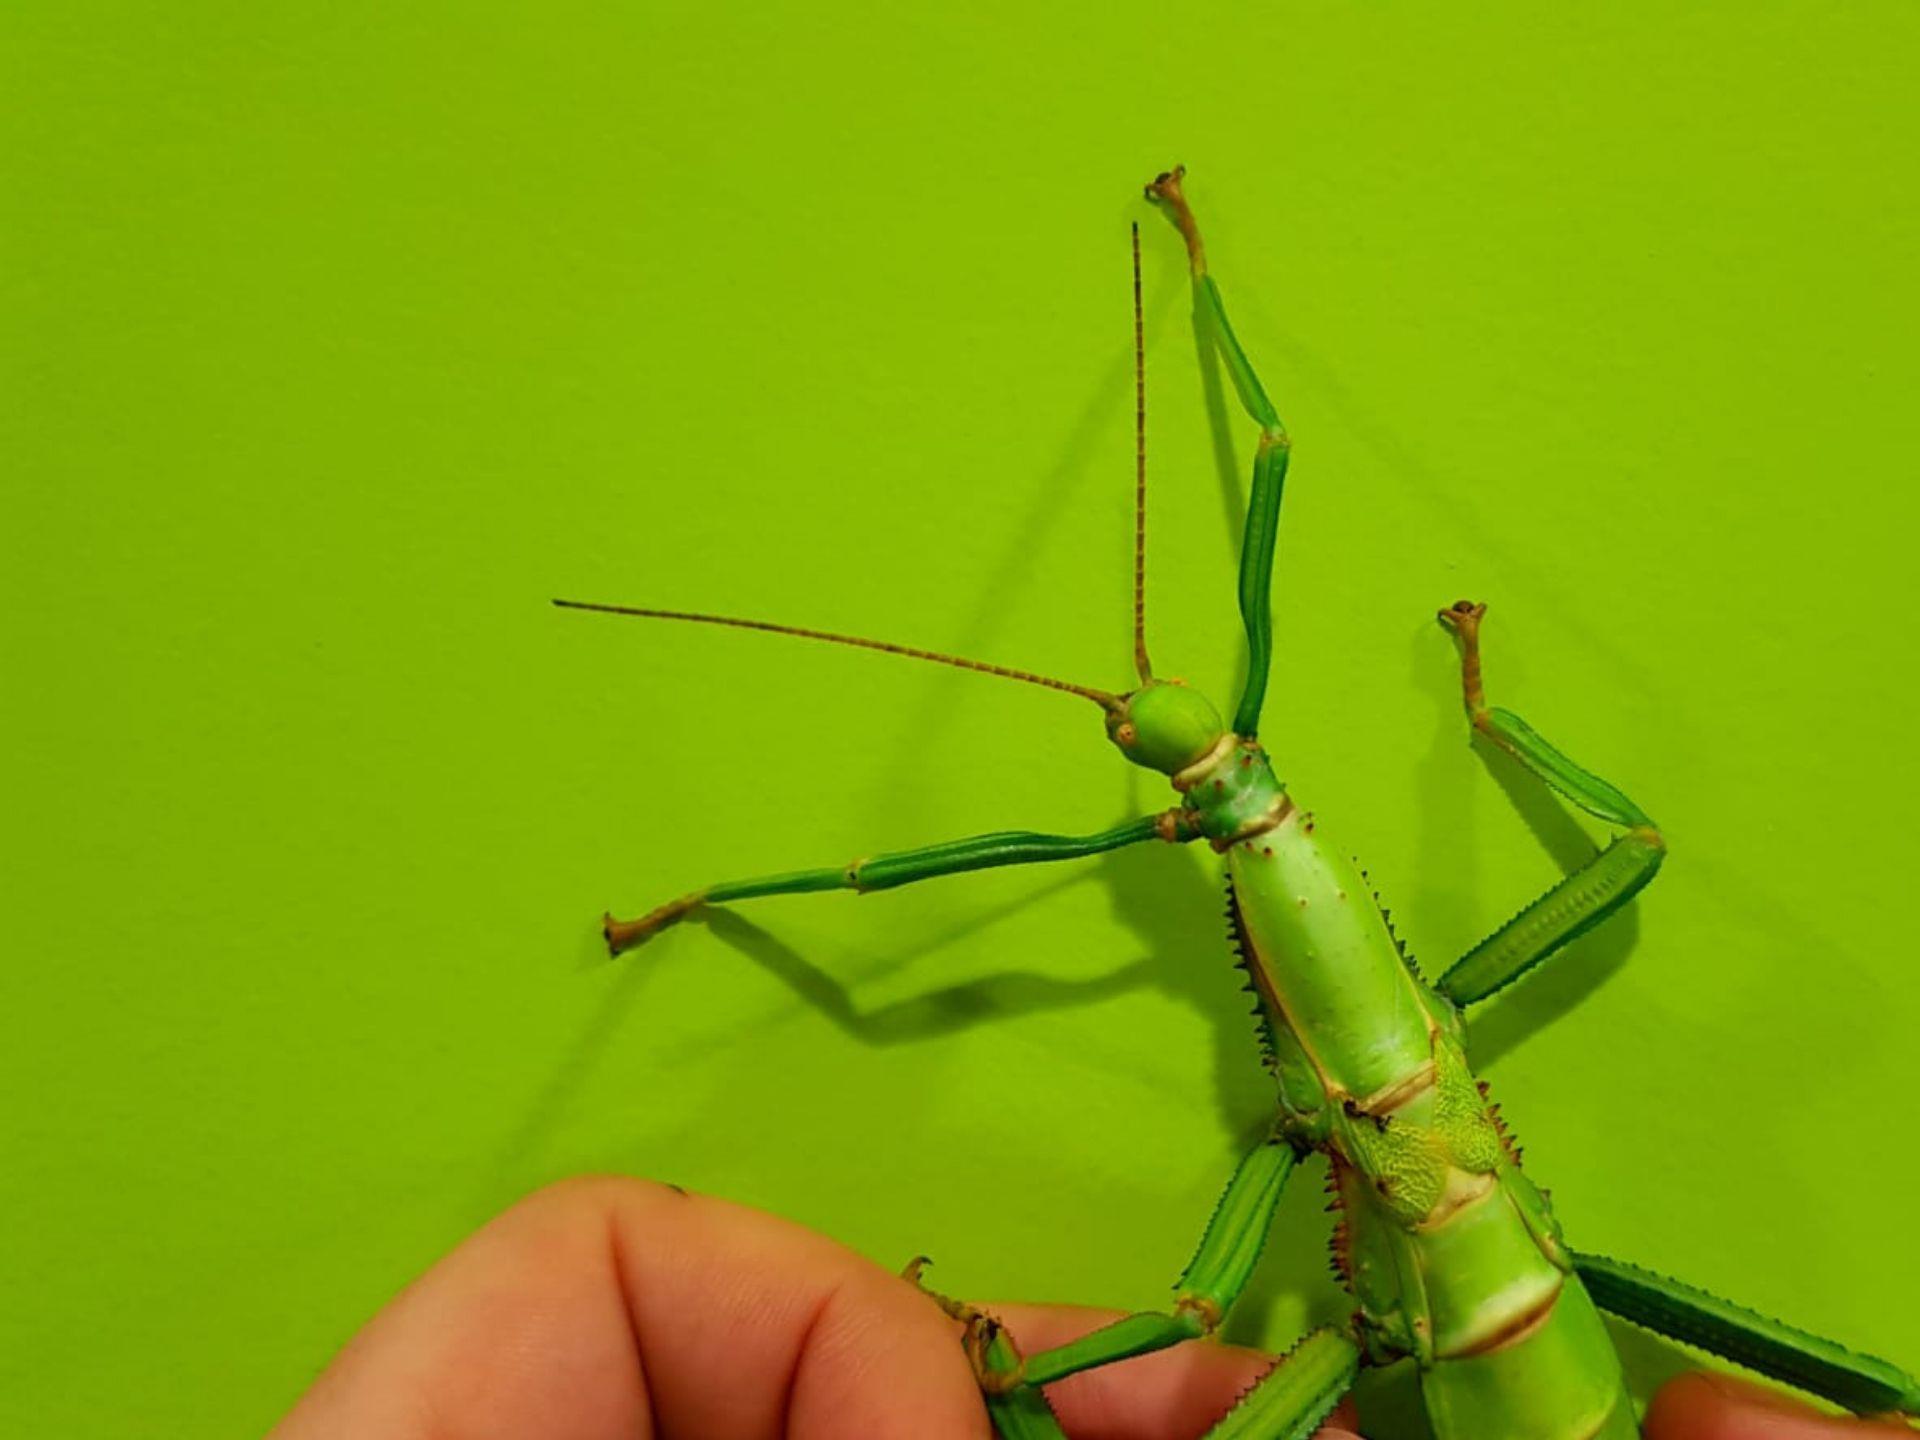 The Bug Farm green bean stick insect